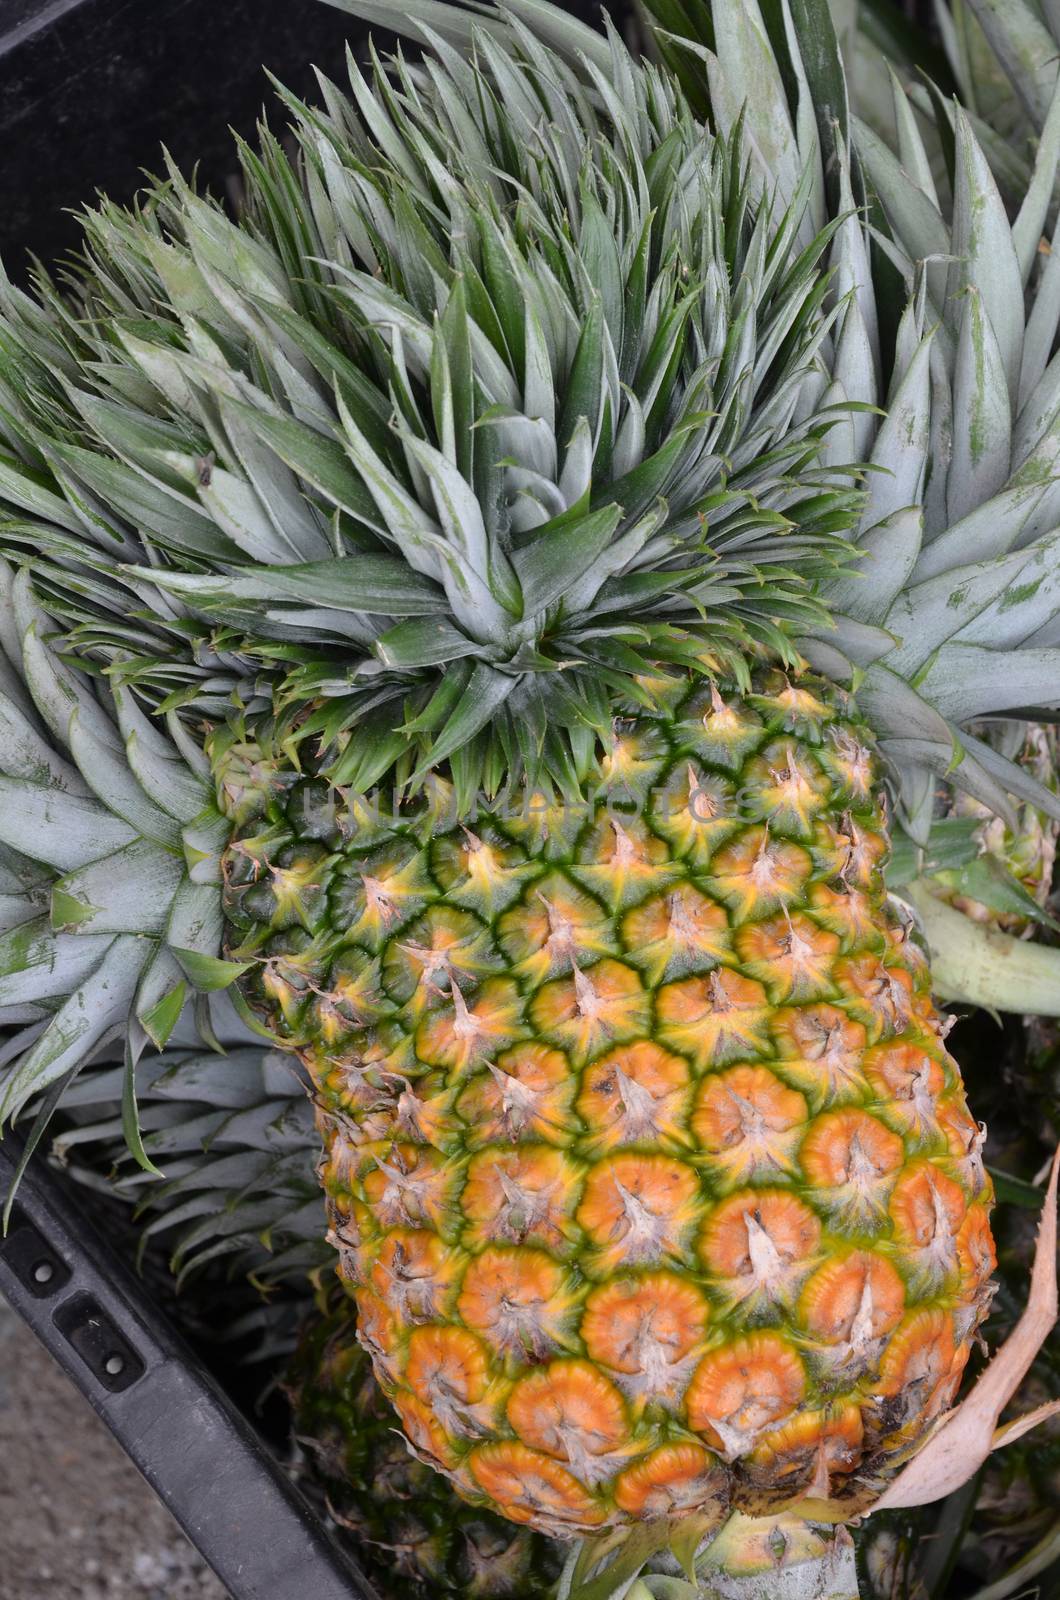 Pineapple tropical fruit on the market for sale